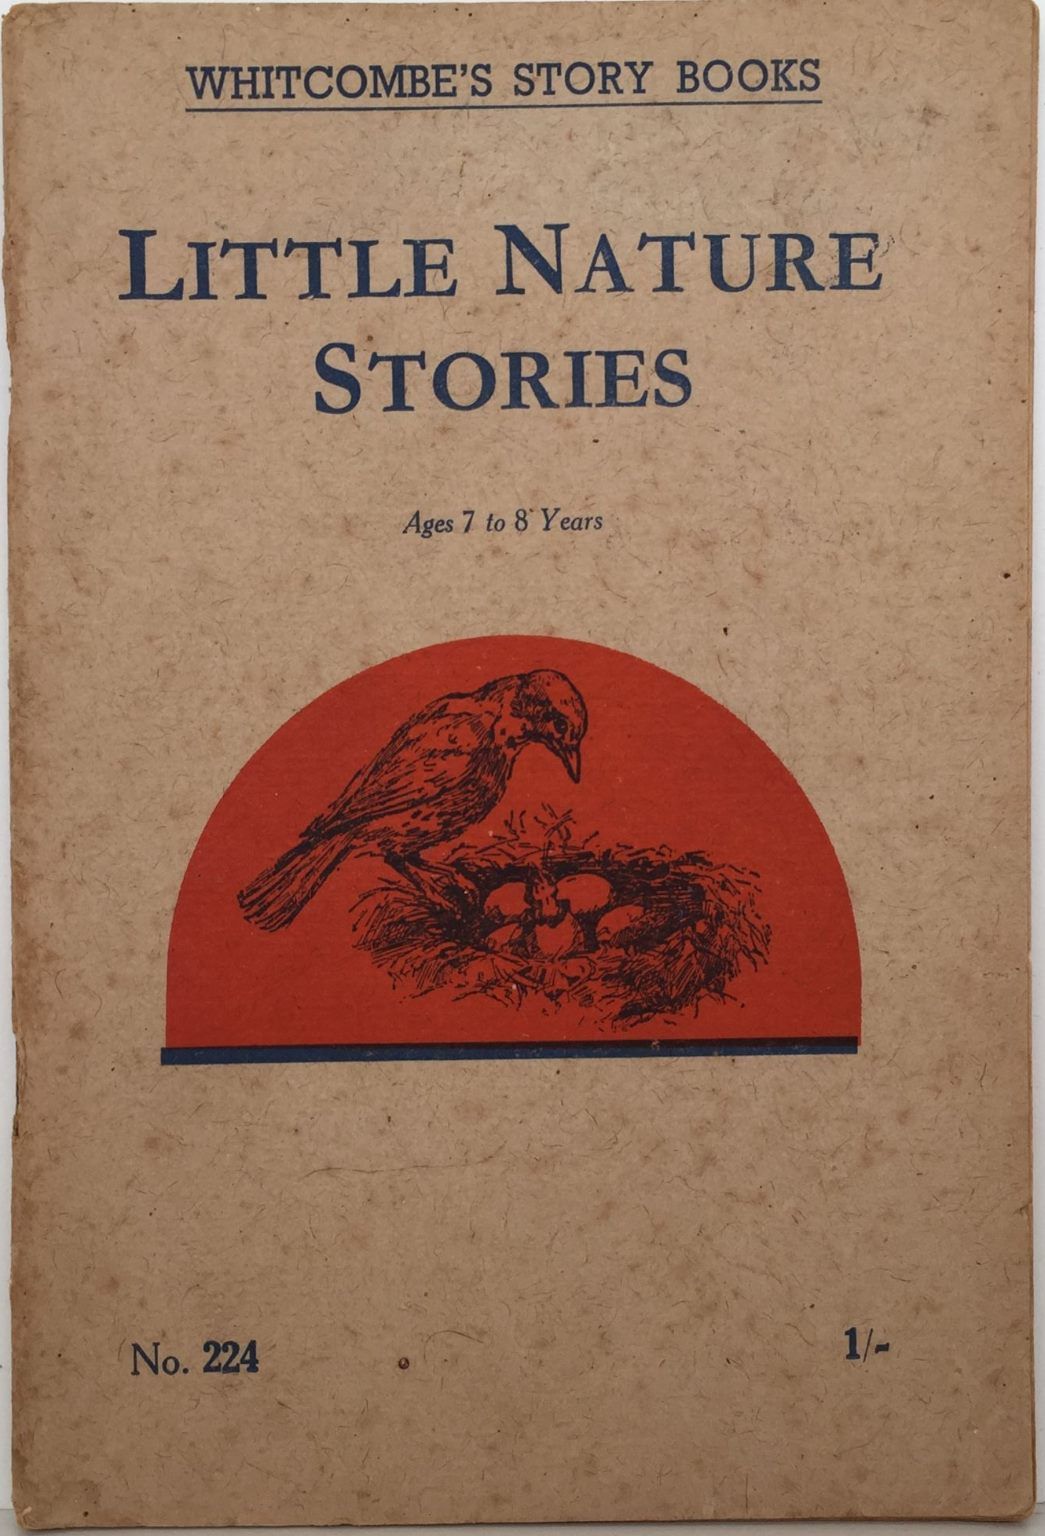 LITTLE NATURE STORIES: Whitcombe's Story Books No 224